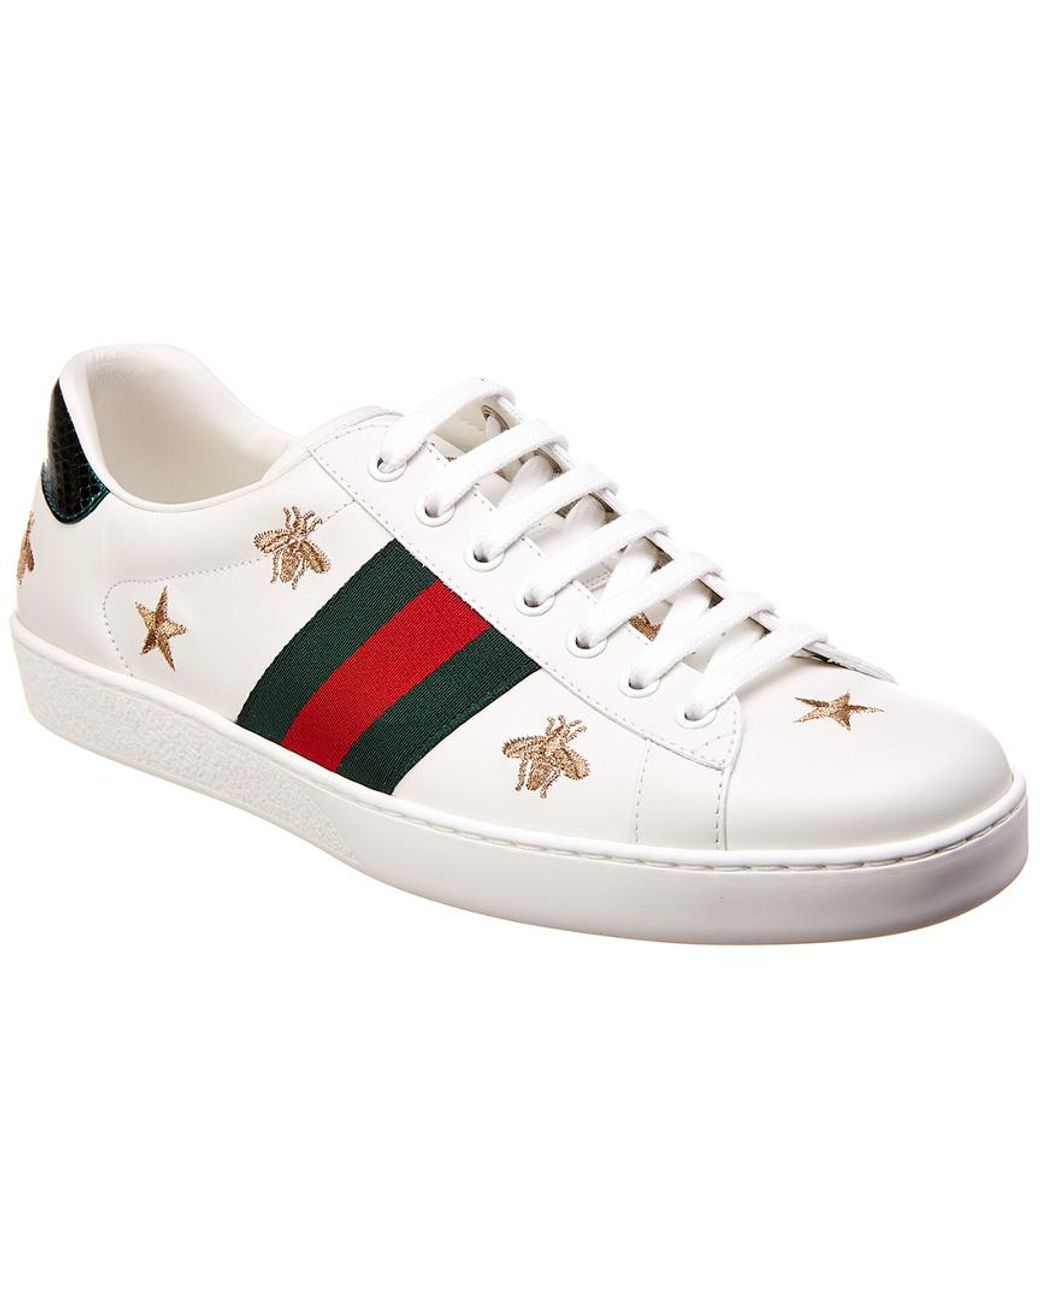 Gucci Ace Sneakers in White Men | Lyst